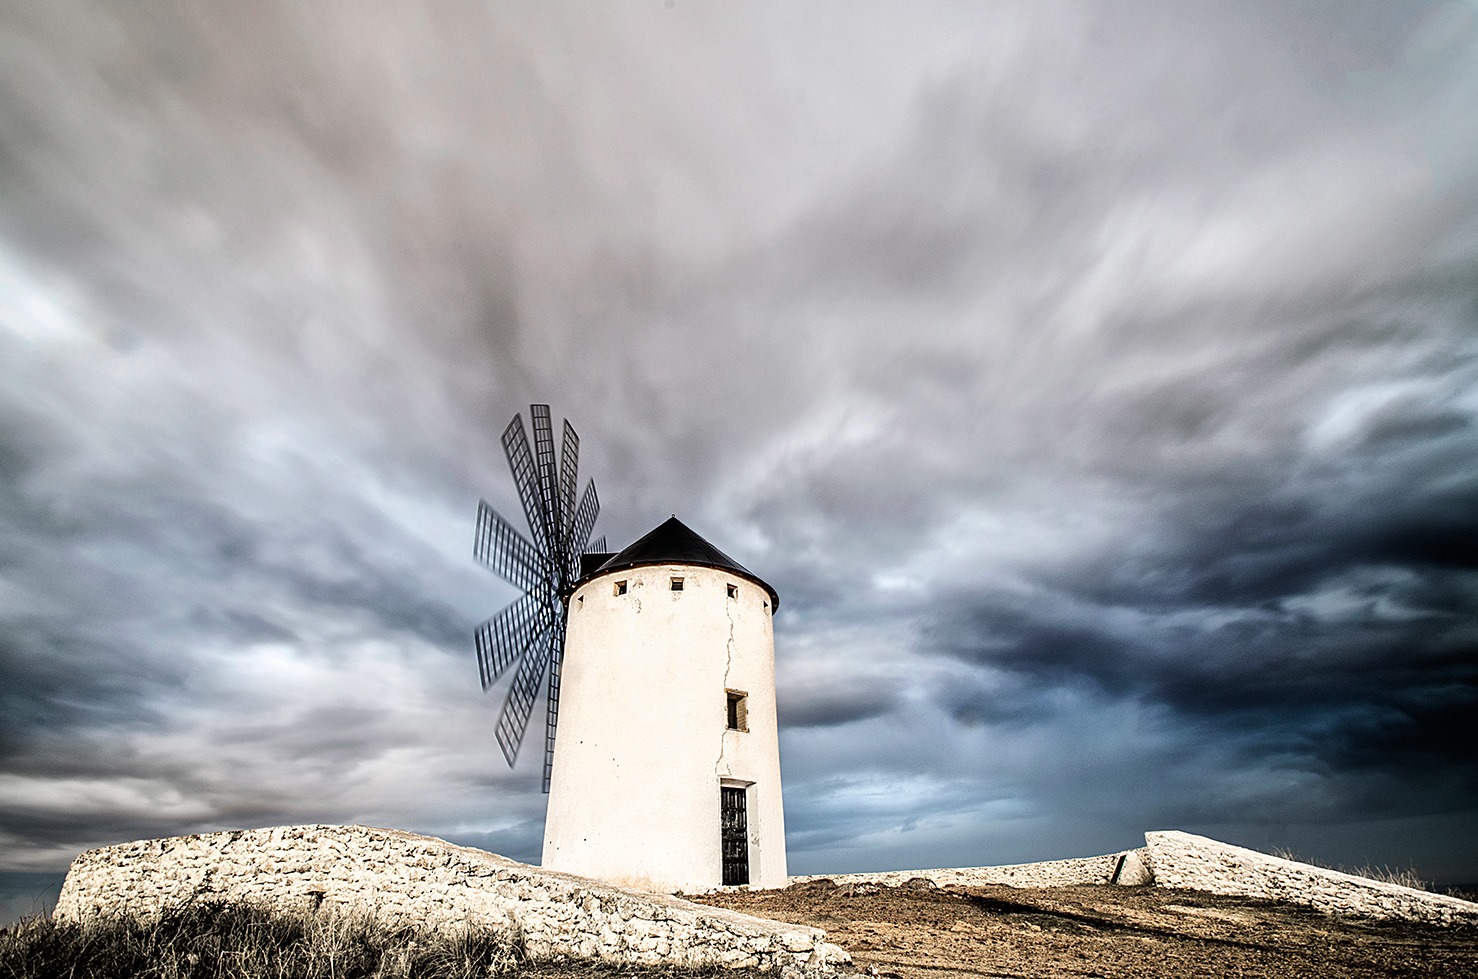 Machego windmill in Herencia, Spain